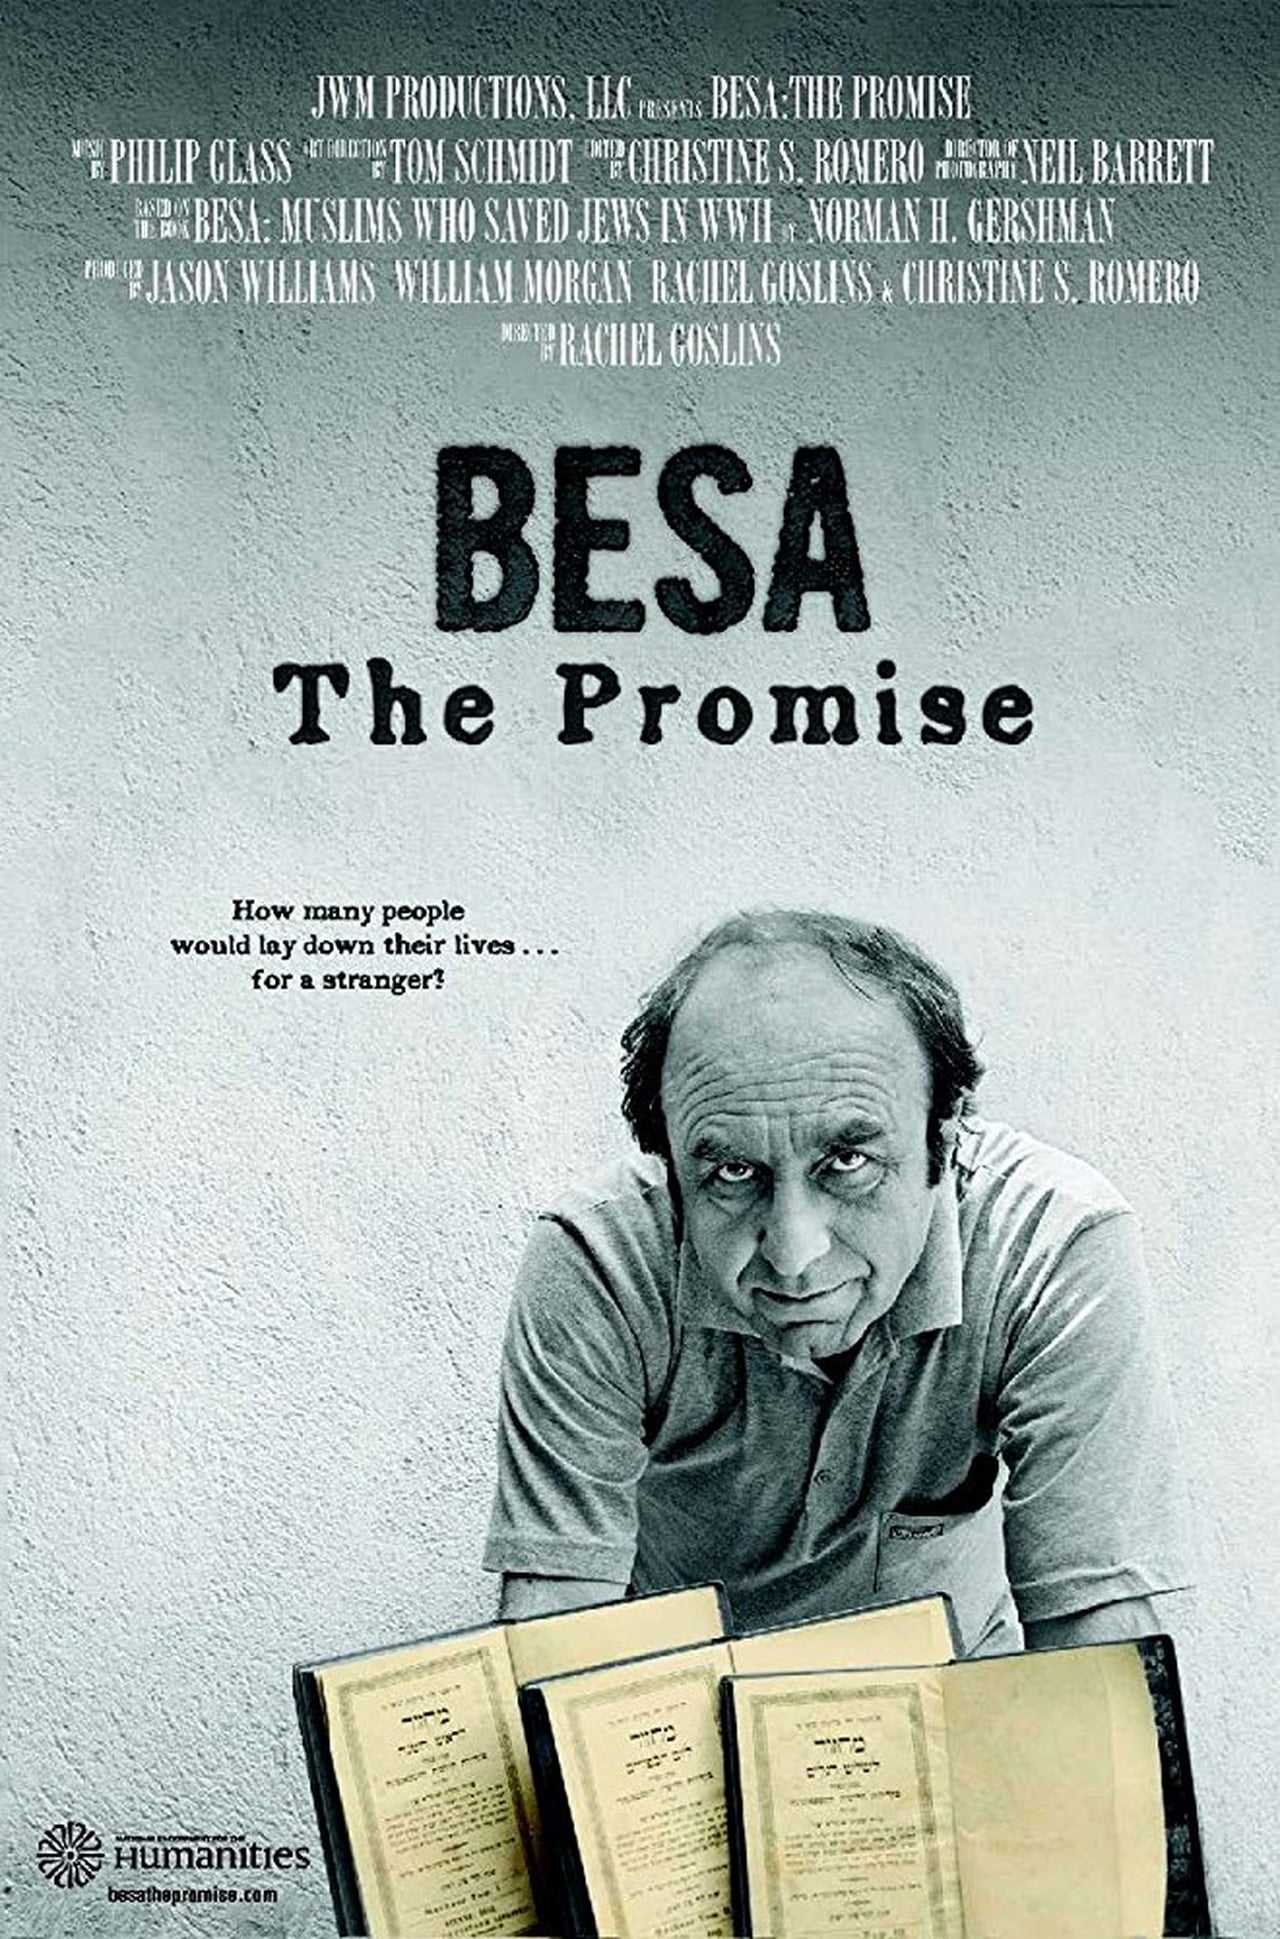 Besa: The Promise